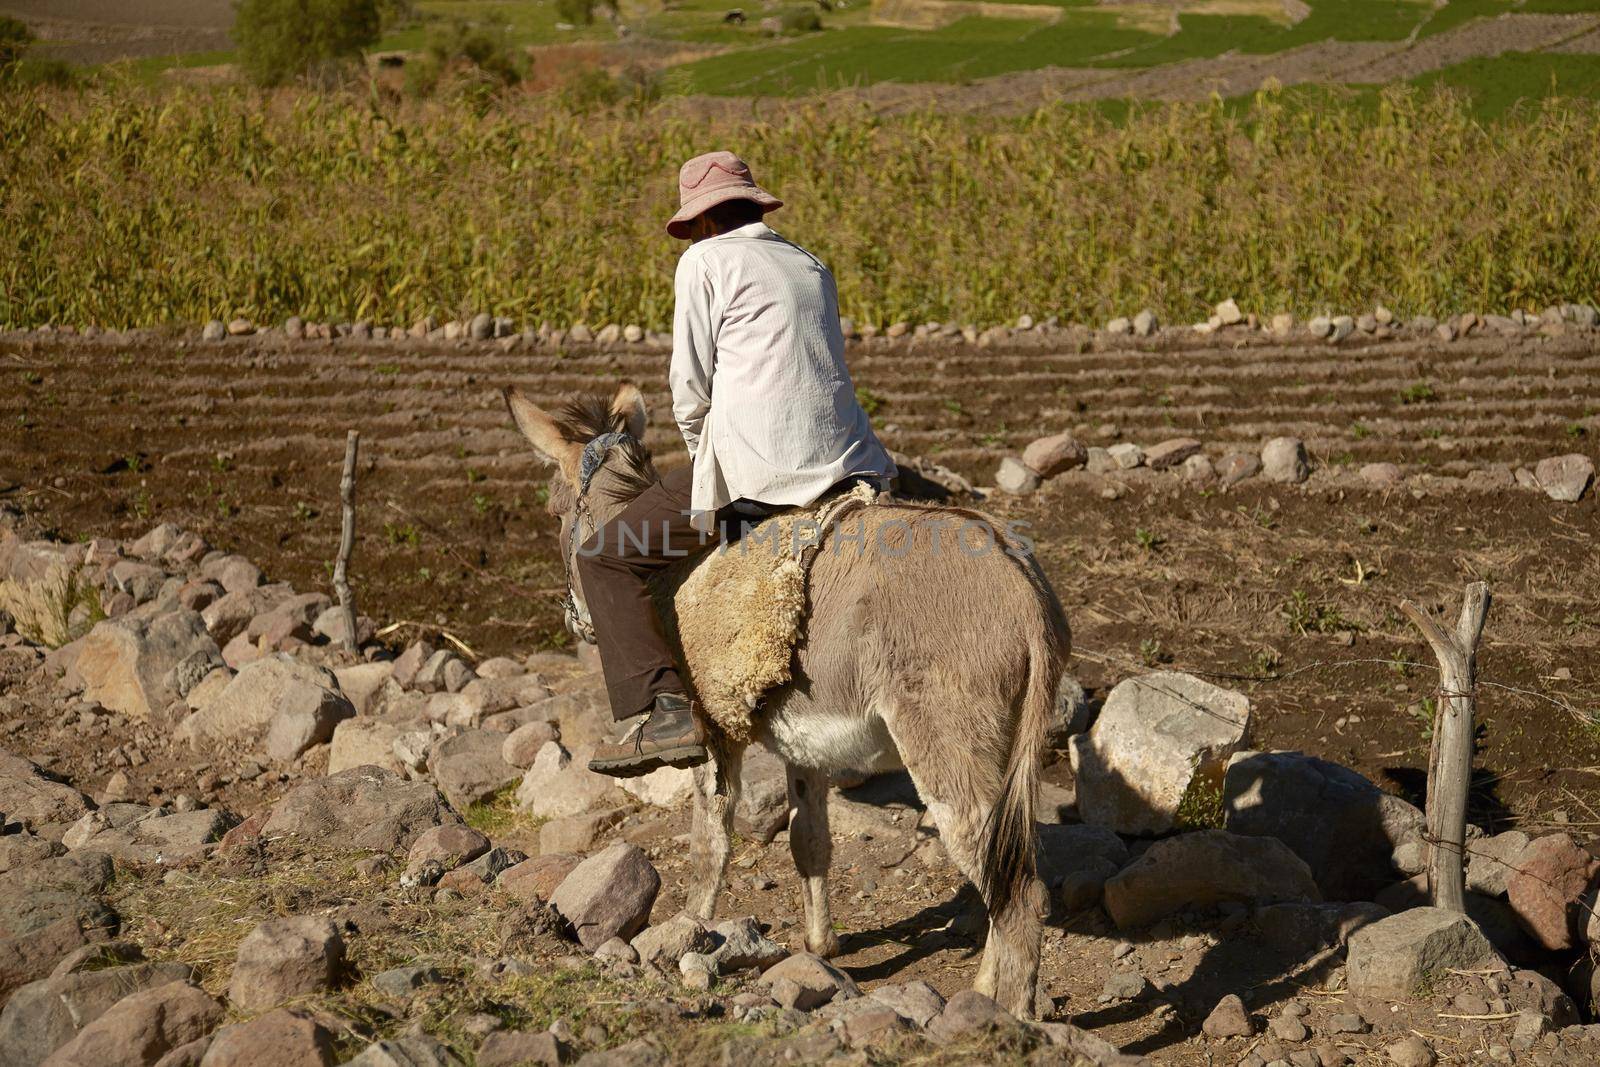 AREQUIPA, PERU - JUNE 17, 2012: Local man riding a donkey while working on a field in Arequipa Peru by wondry